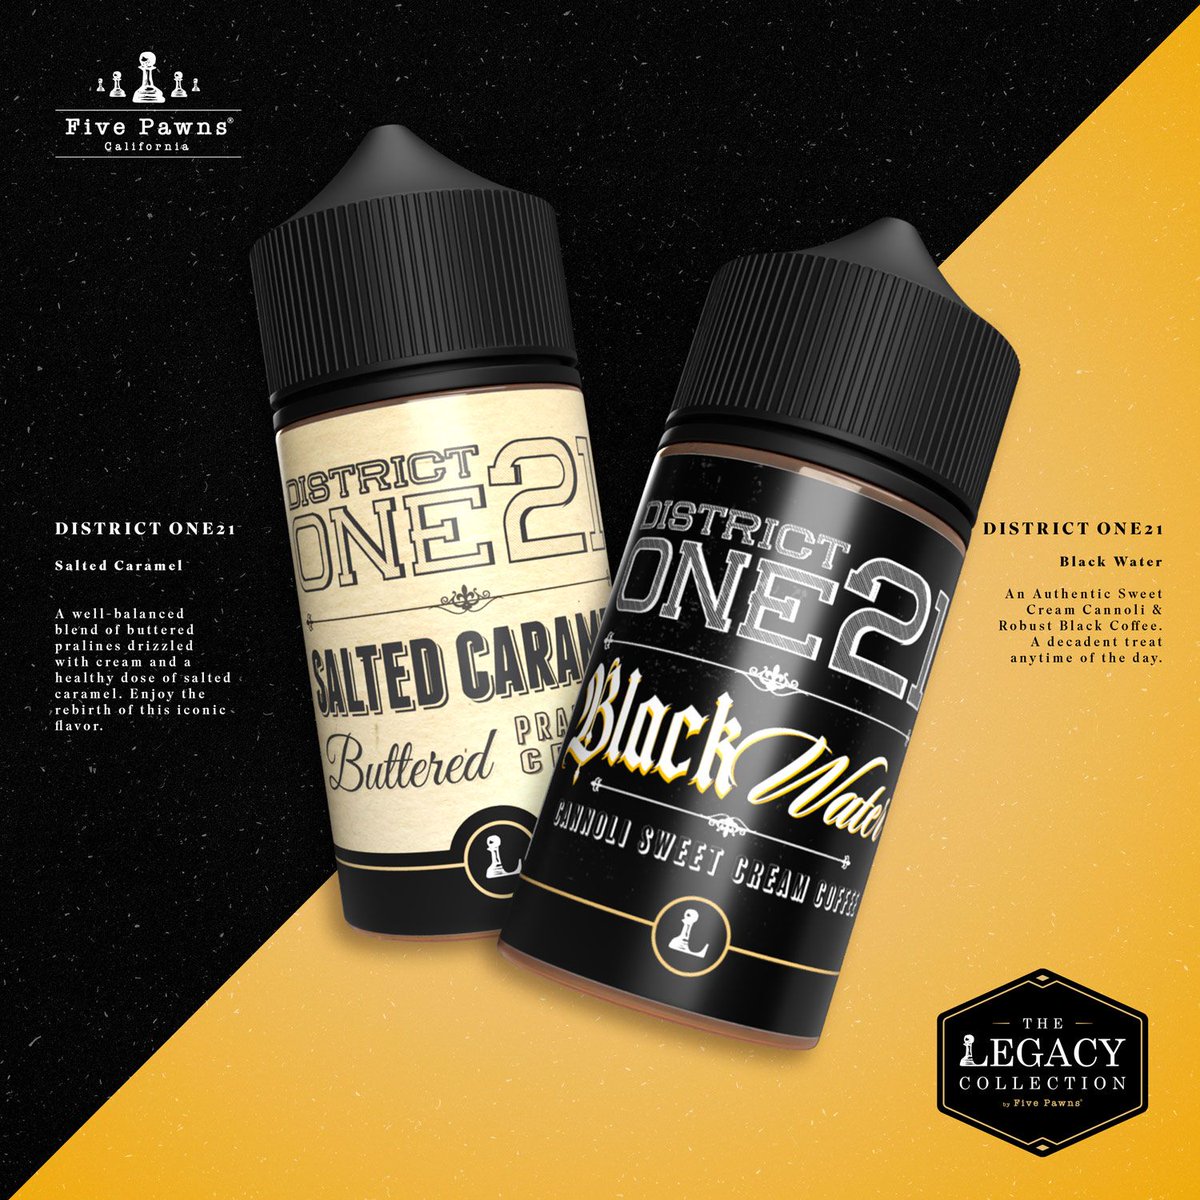 District One21 - known for their robust and delicious flavors. Enjoy the sweet buttery sensation of Salted Caramel or the rich coffee and cannoli swirl of Black Water!

#vapecatz #delandvapeshop #floridavapes #ecigsourcedeland #deland #vapingsaveslives 
#fivepawns @fivepawns